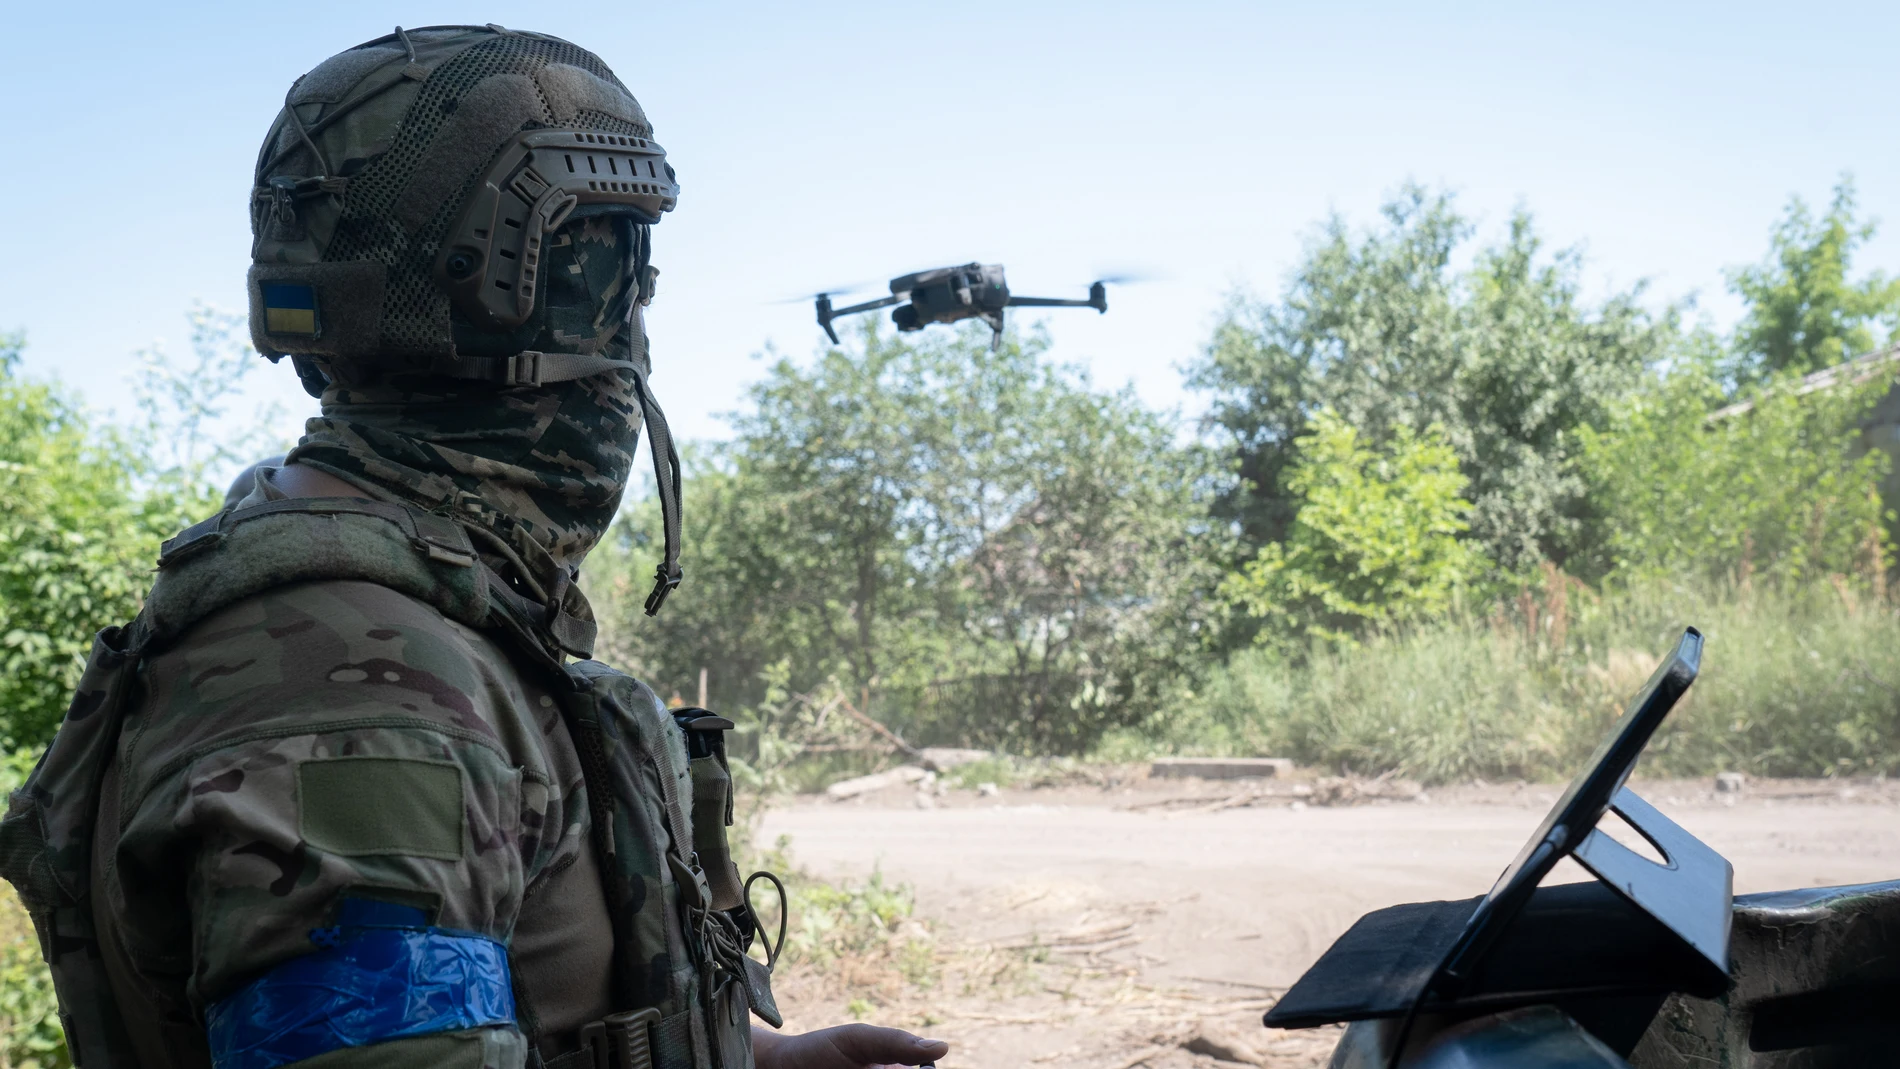 June 20, 2023, Ukraine: A soldier seen demonstrating a drone mission in the newly liberated village of Storozheve. As the long-awaited Ukrainian counteroffensive started, Ukrainian armed force is facing strong resistance from the Russian soldiers. Despite they have liberated several villages including Neskuchne, Storozheve, Blahodatne in the southeast Donetsk region, the counteroffensive remains slow. (Foto de ARCHIVO) 20/06/2023